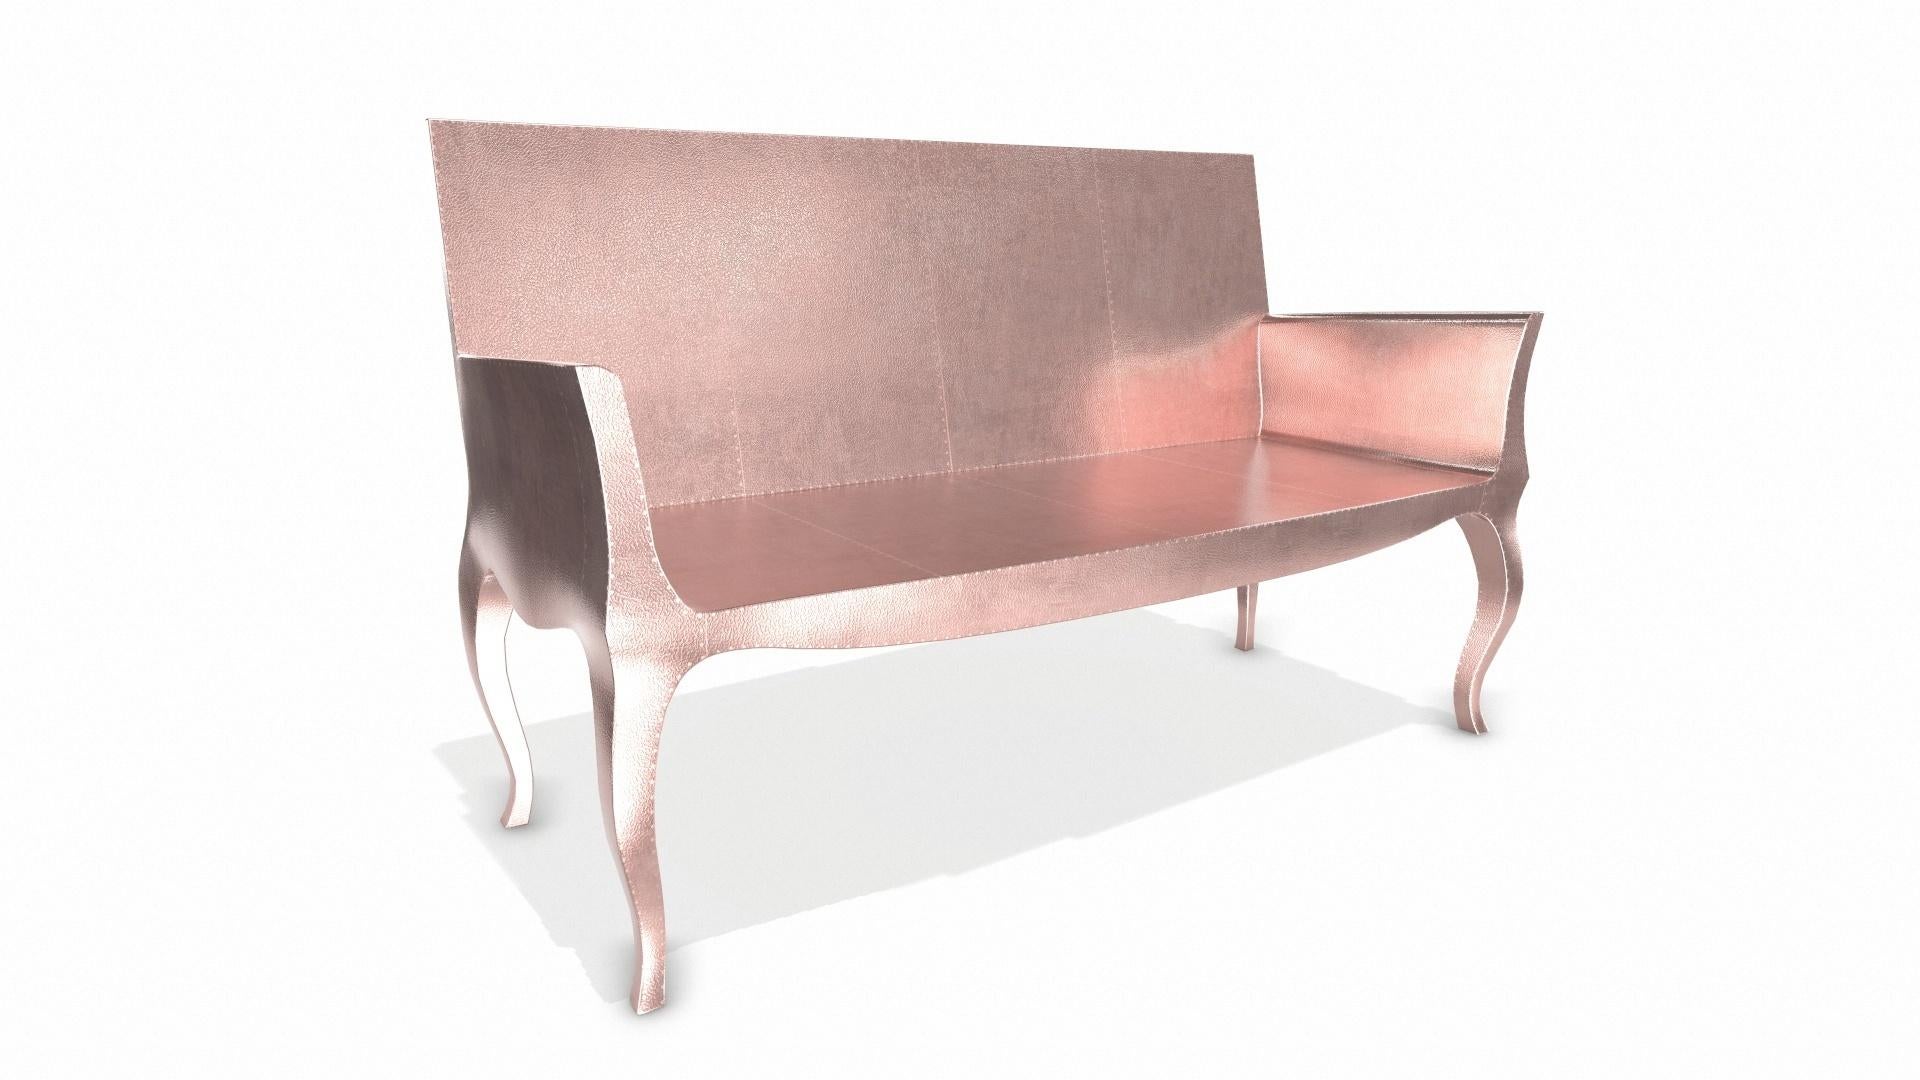 Contemporary Louise Settee Art Deco Daybeds in Fine Hammered Copper by Paul Mathieu For Sale